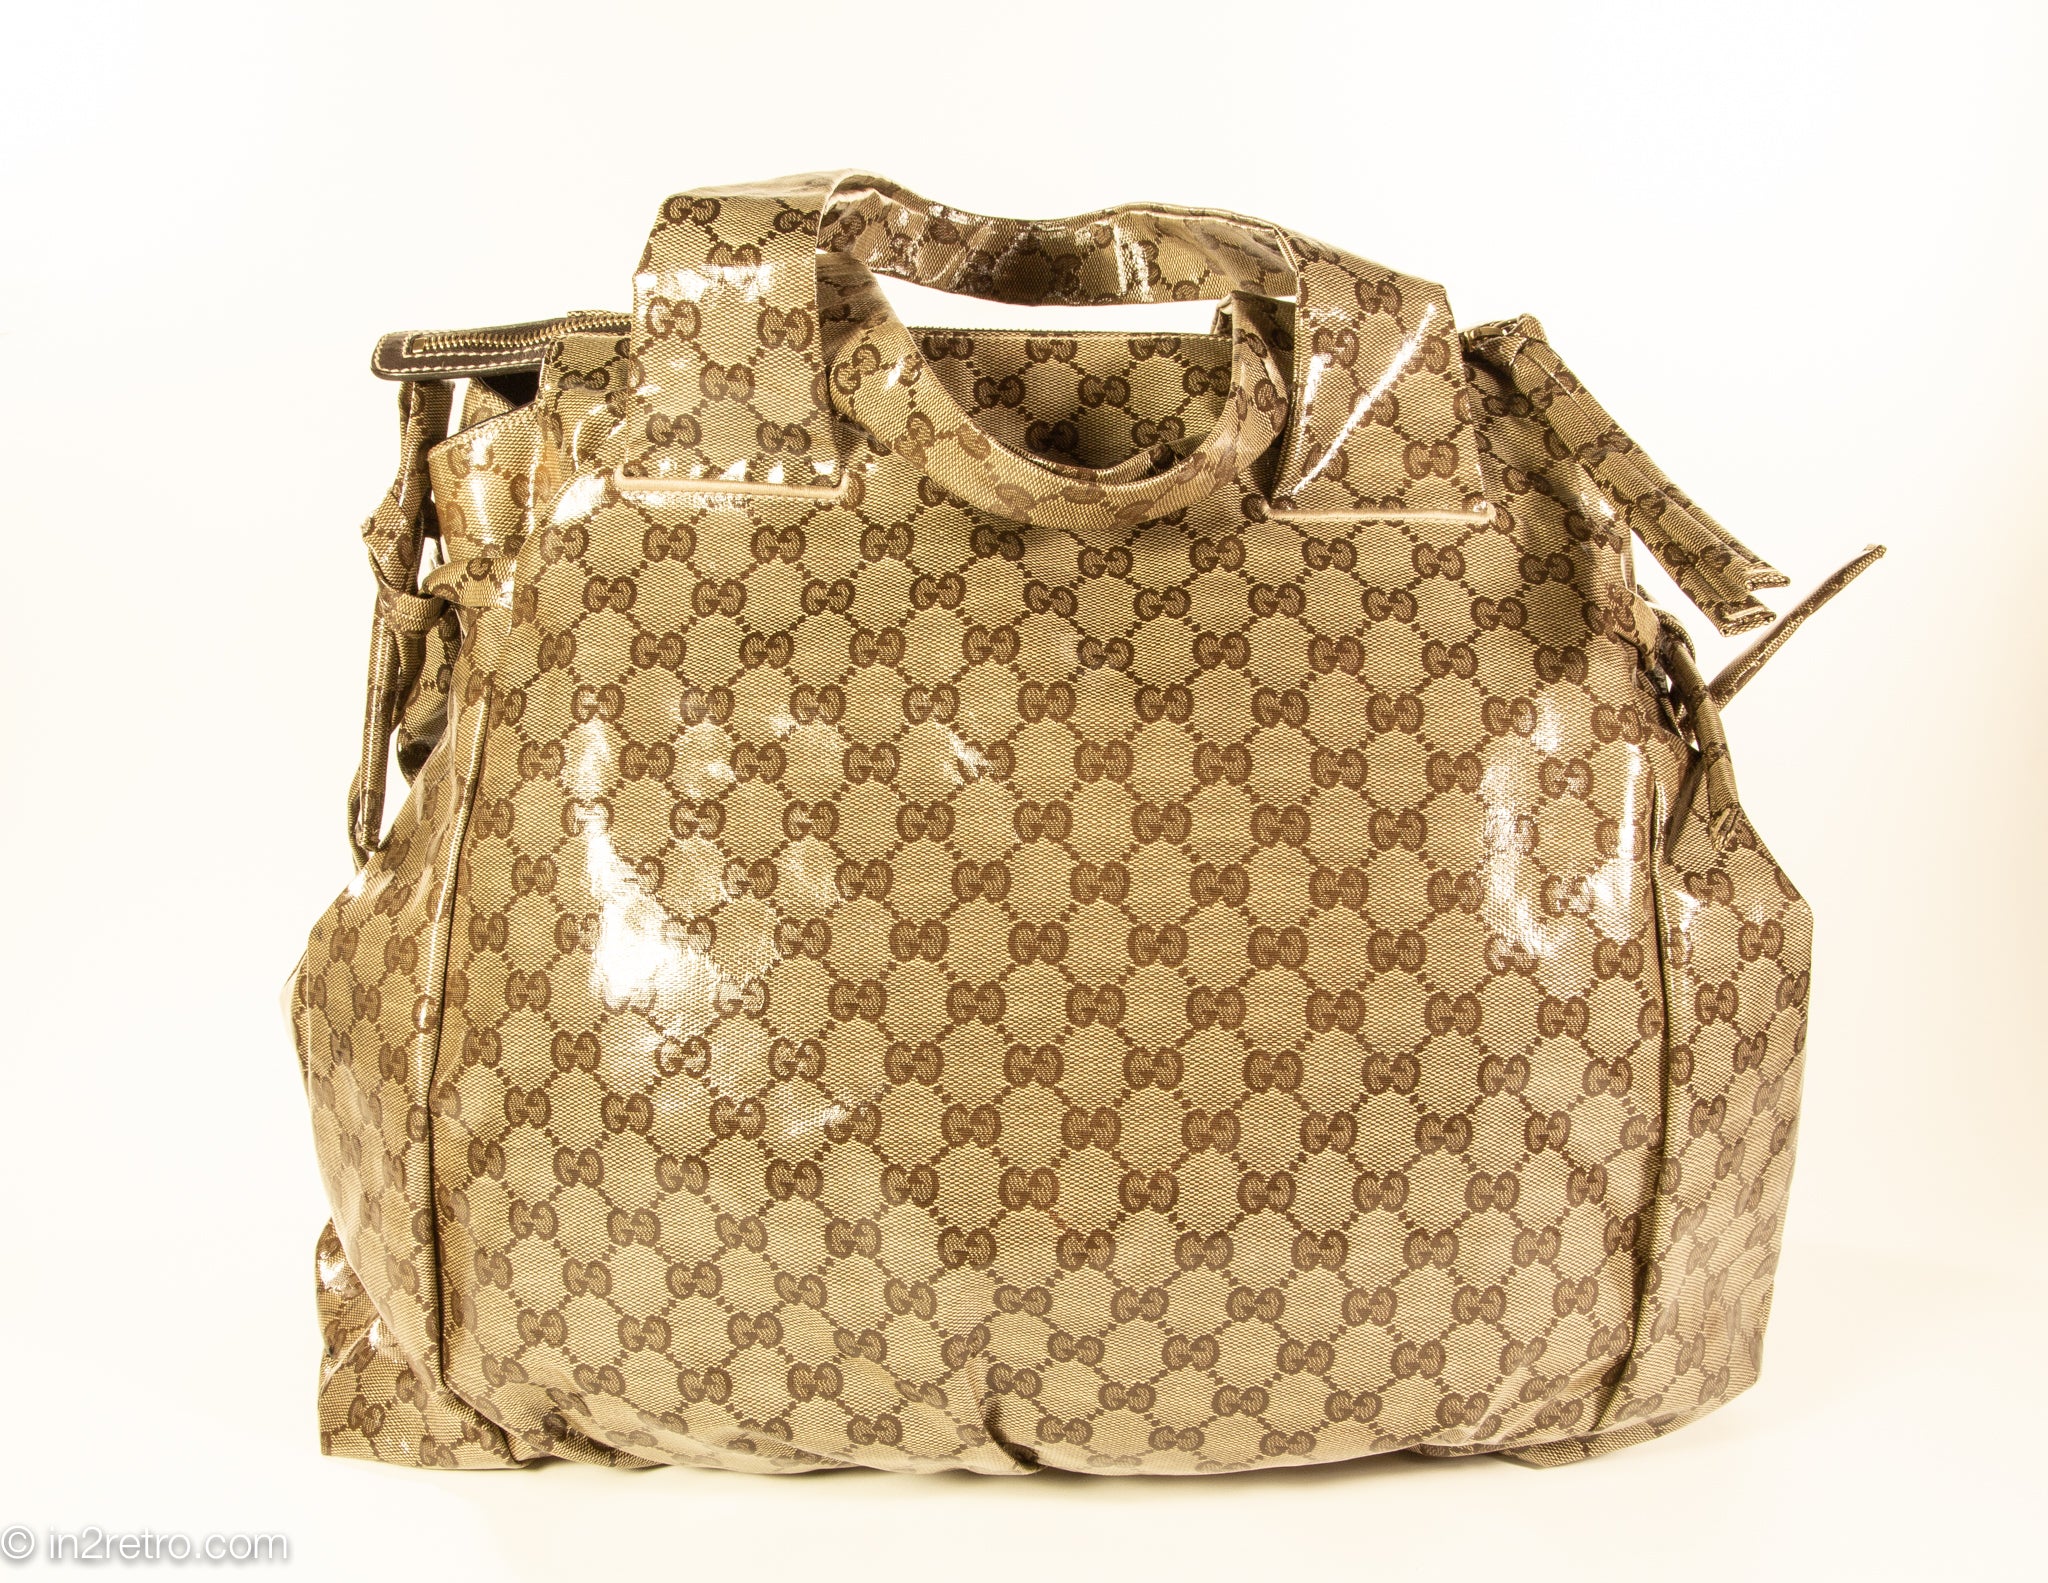 VINTAGE AUTHENTIC GUCCI LOGO GLOSSY CRYSTAL CANVAS HYSTERIA TOTE